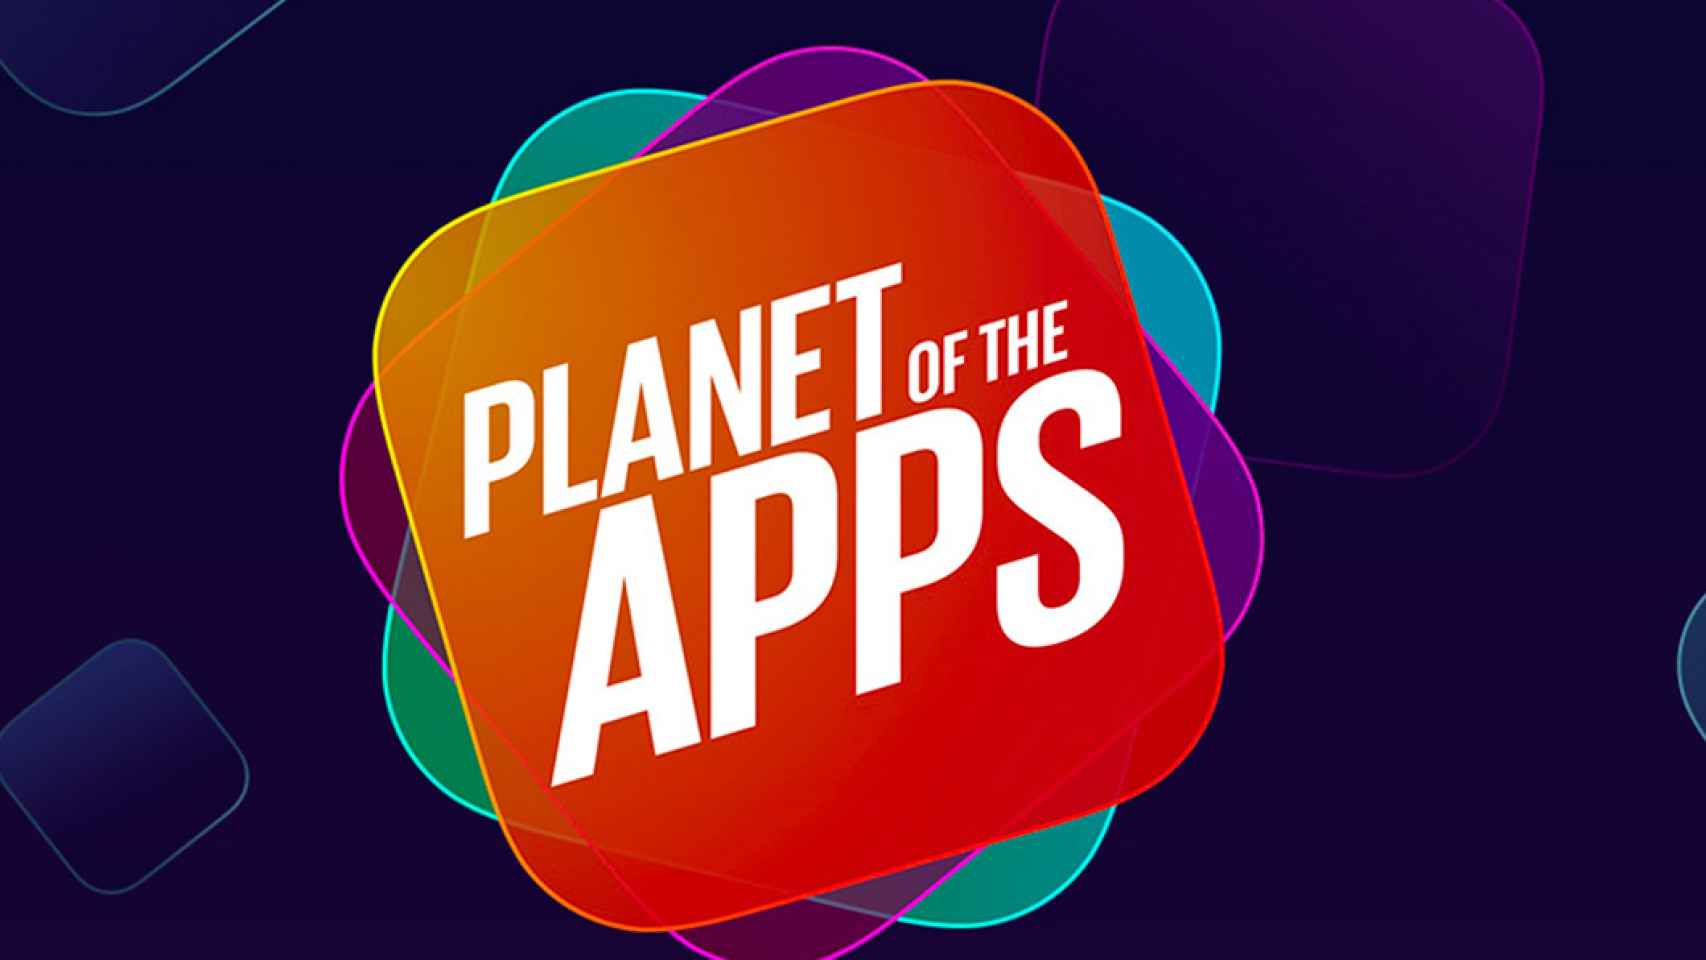 planet-of-the-apps